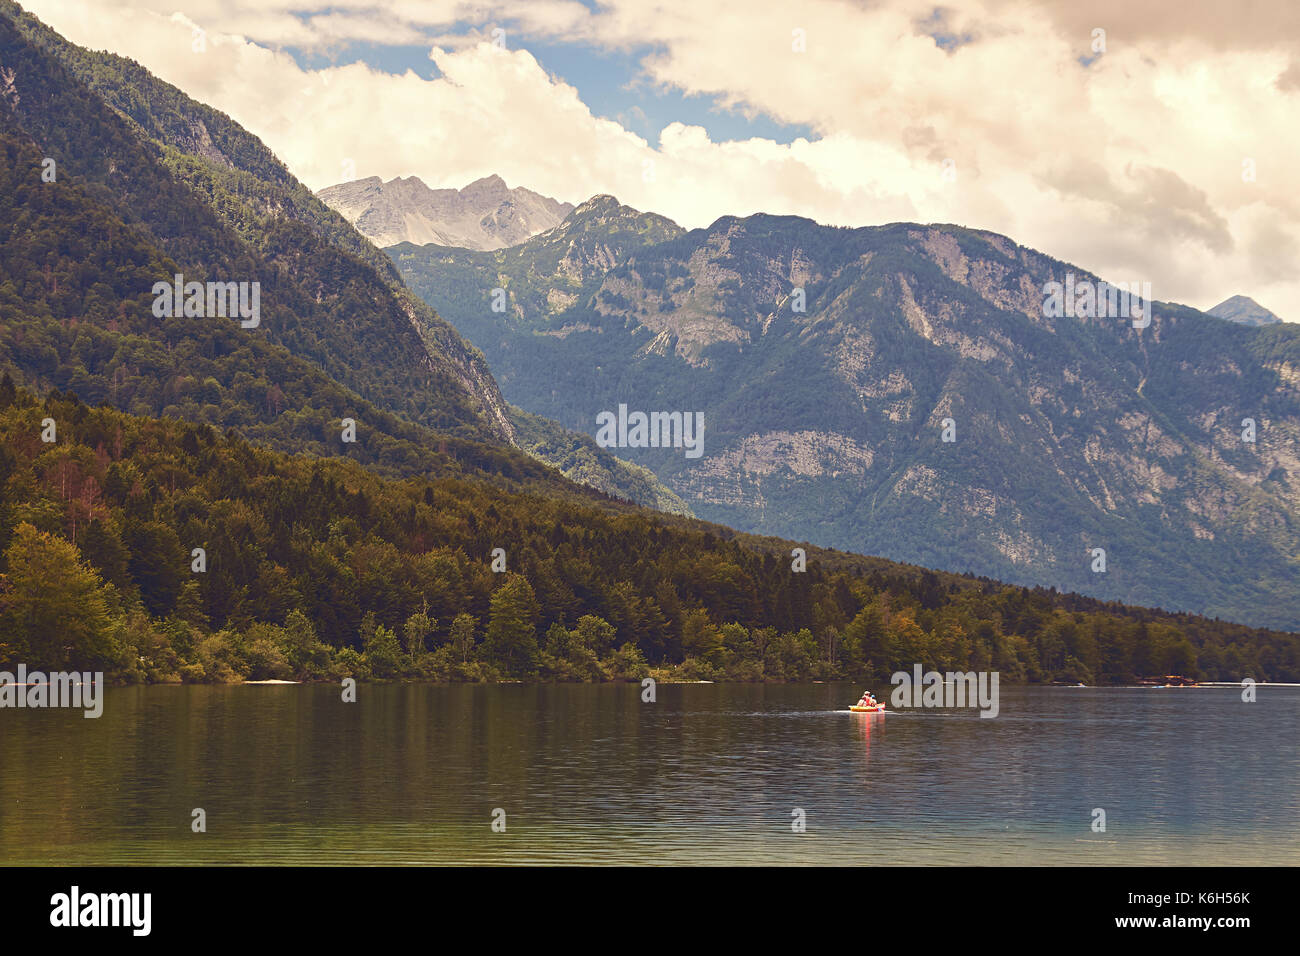 View of lake Bohinj with the boat sailing across it Stock Photo